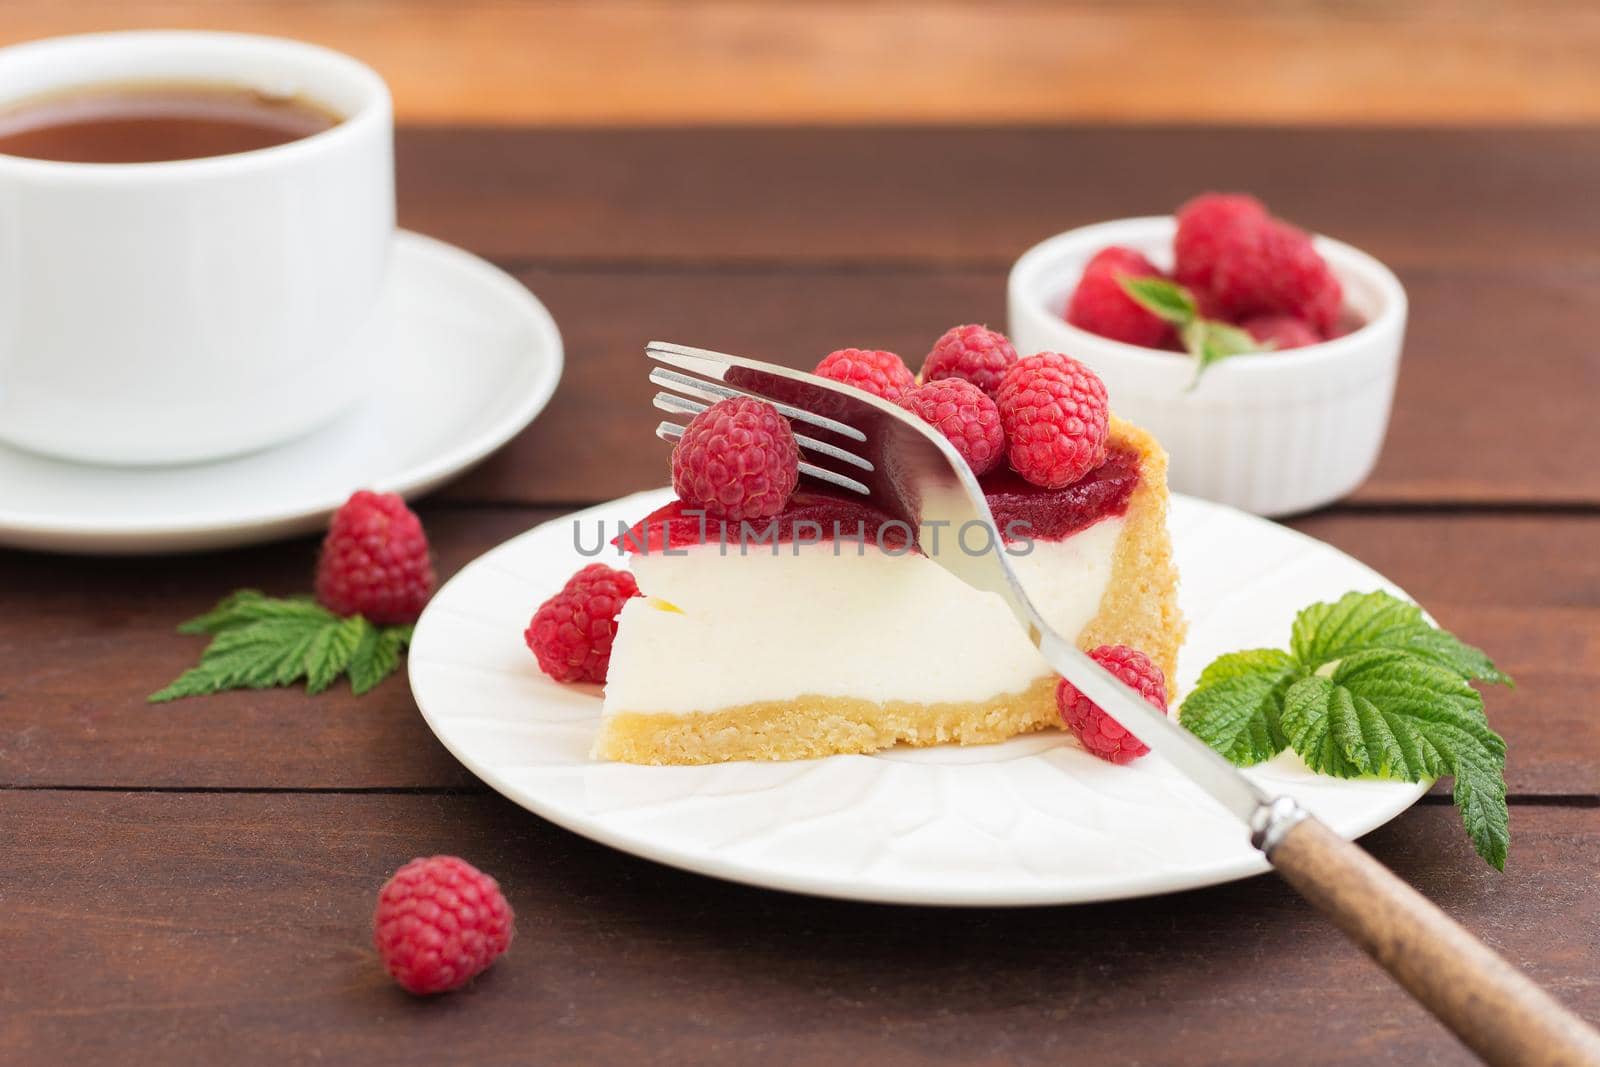 A fork cuts a piece of raspberry pie (cheesecake) lying on a plate, on a wooden background by lara29